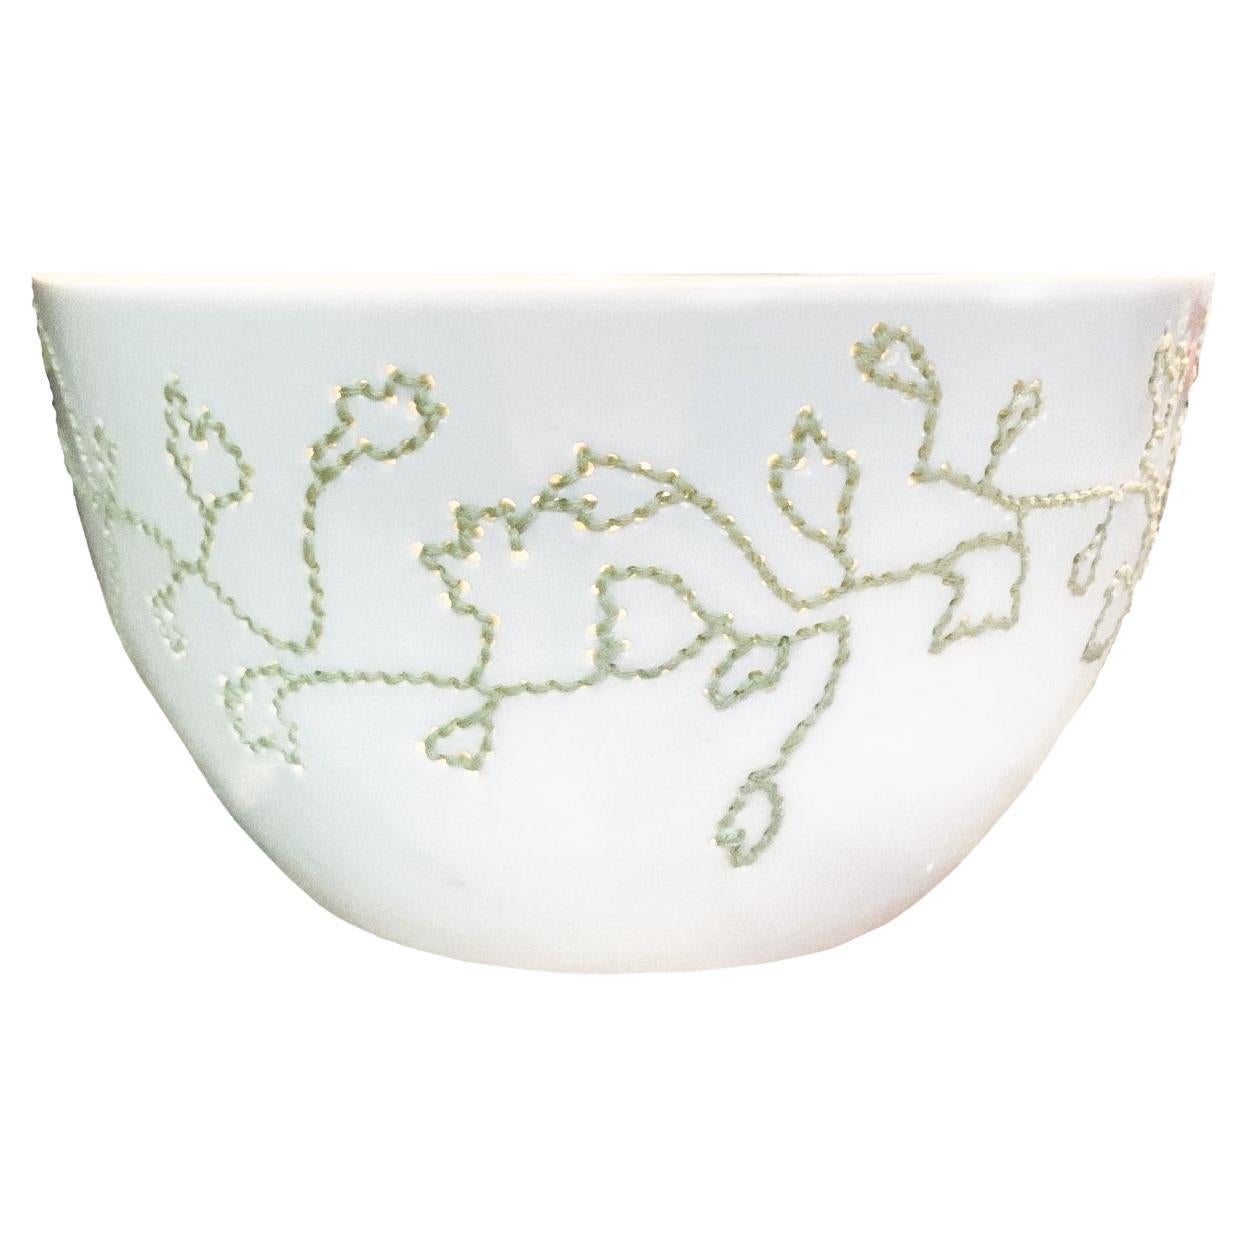 This embroidered porcelain bowl, produced by Koninklijke Tichelaar Makkum, the Netherlands, embodies the determination Jongerius has shown in solving impossible problems by working around them. Here, the inspiration comes from the work she had been